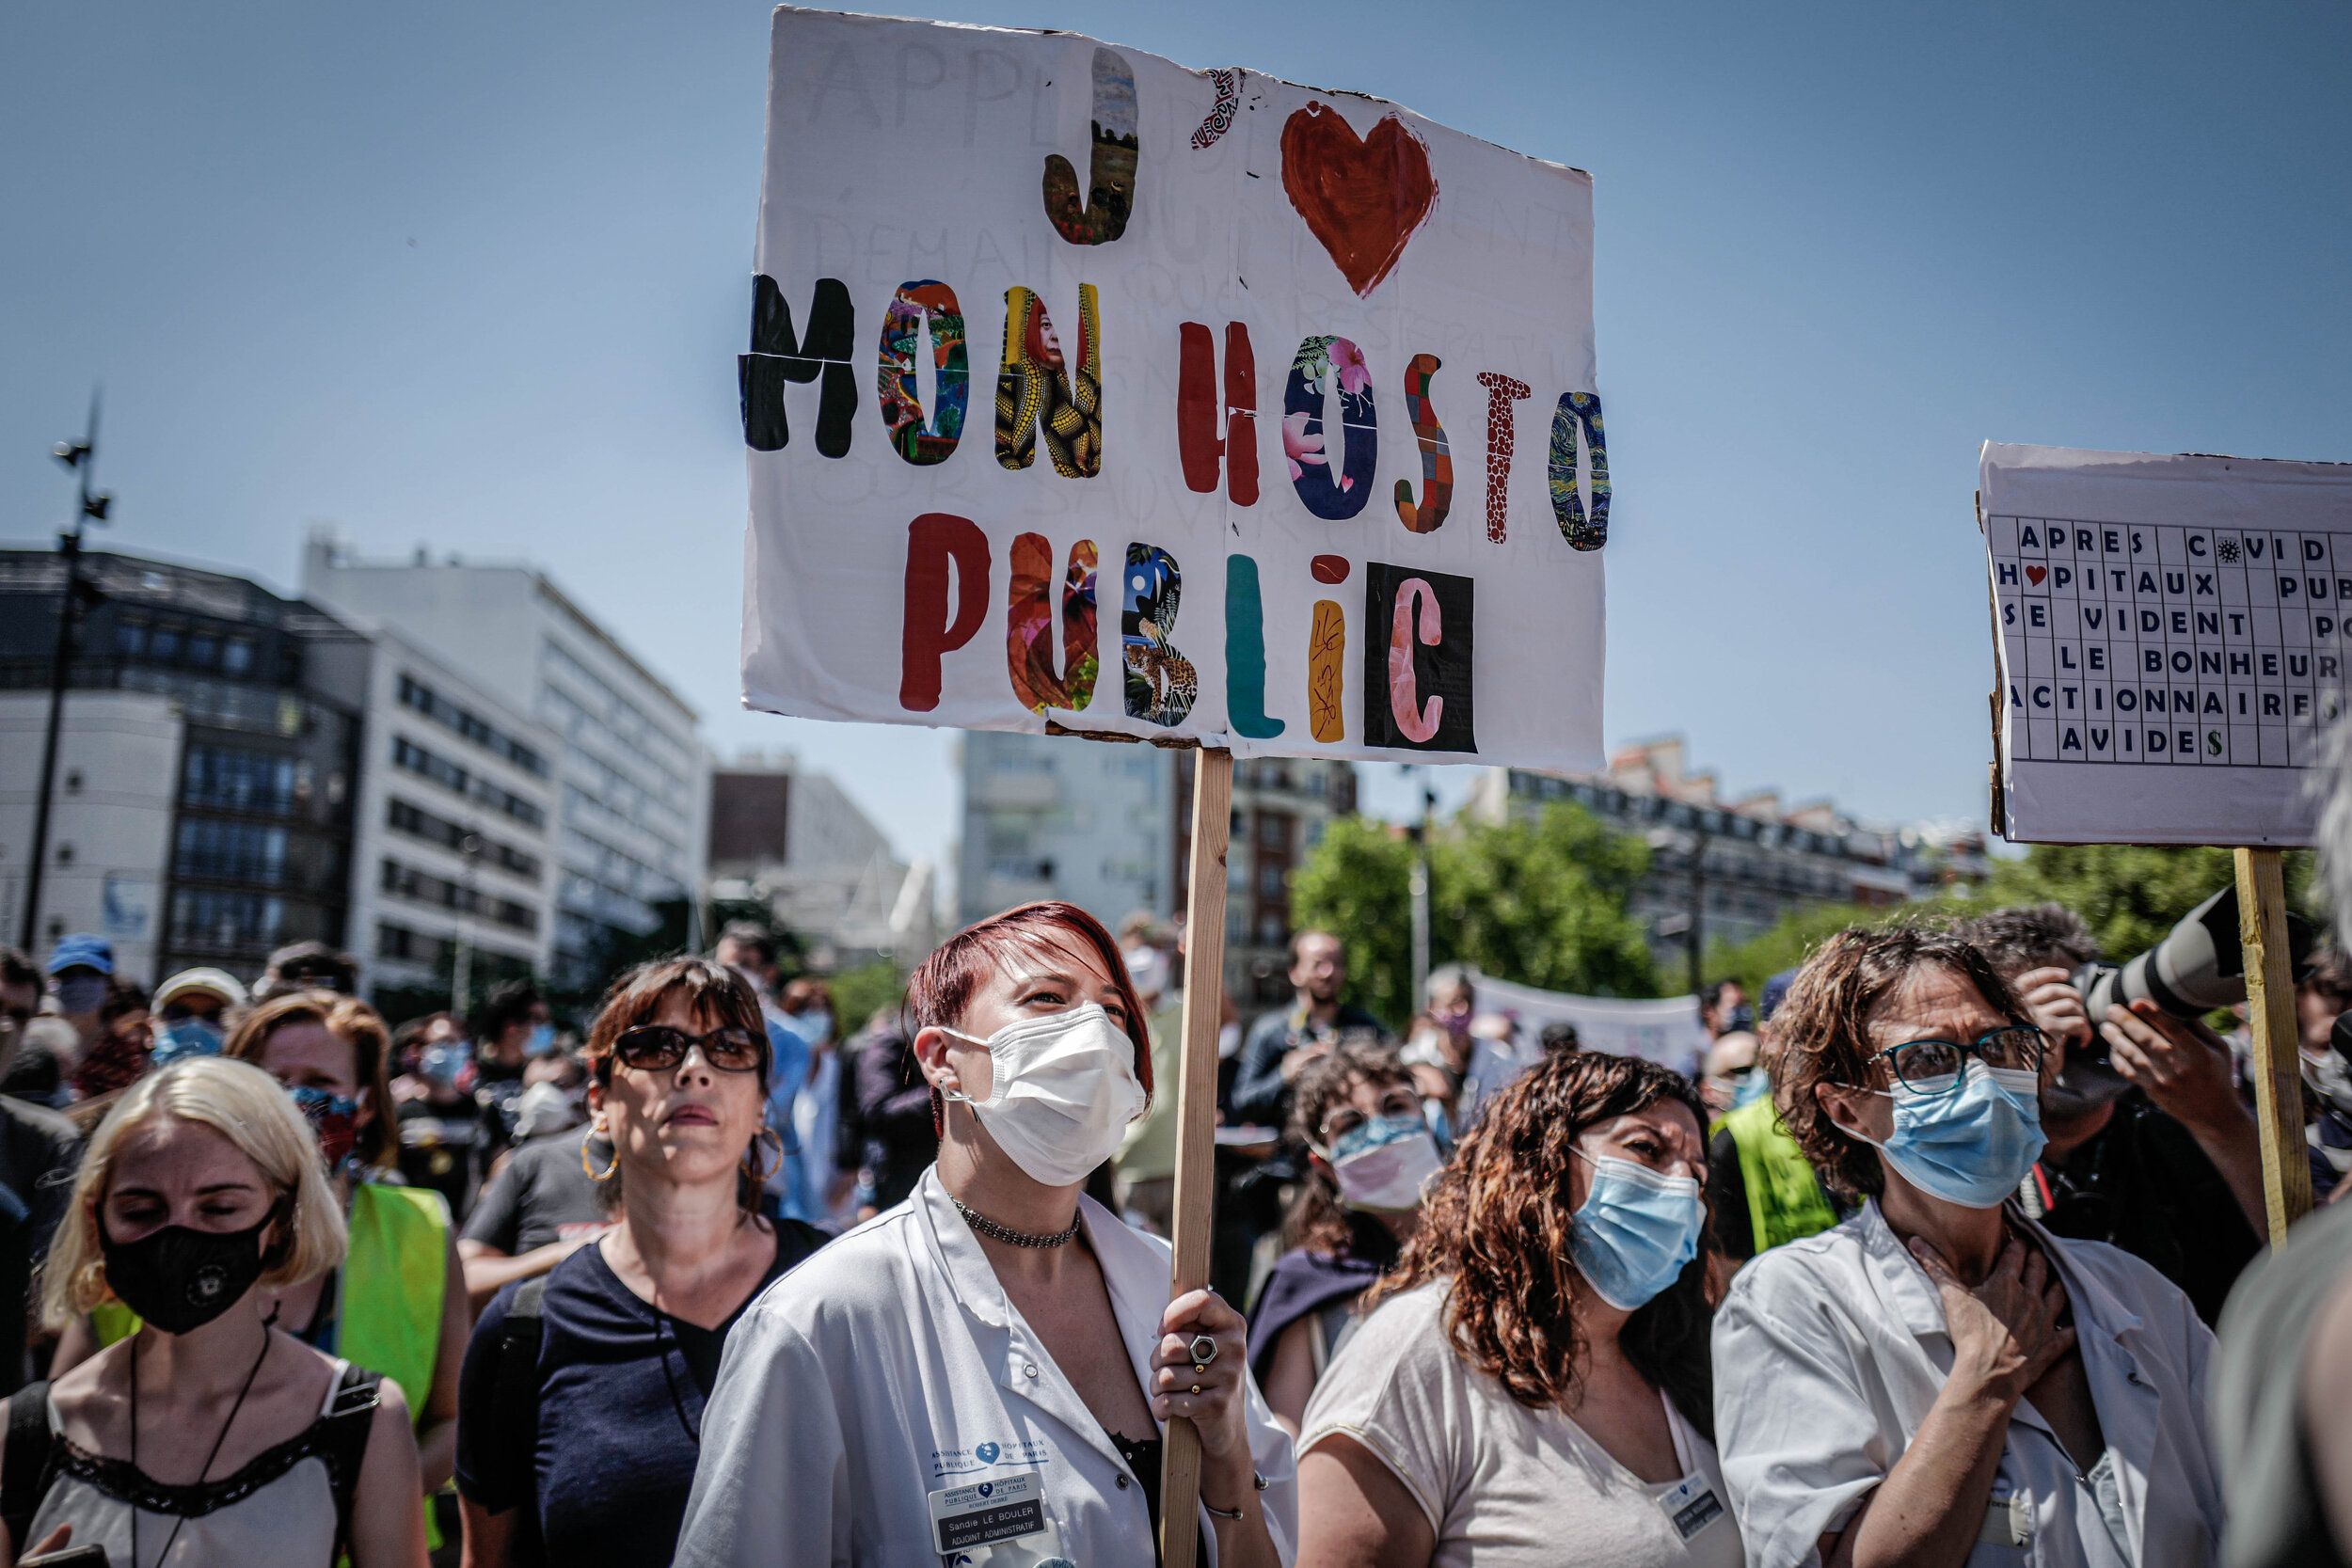   © Luc Nobout / IP3; Paris, France, le 28 mai 2020 - Parisian health workers demonstrate in front of Robert Debre hospital to call for better working conditions and an increase in staff while the French government launched Segur la sante, in the mid